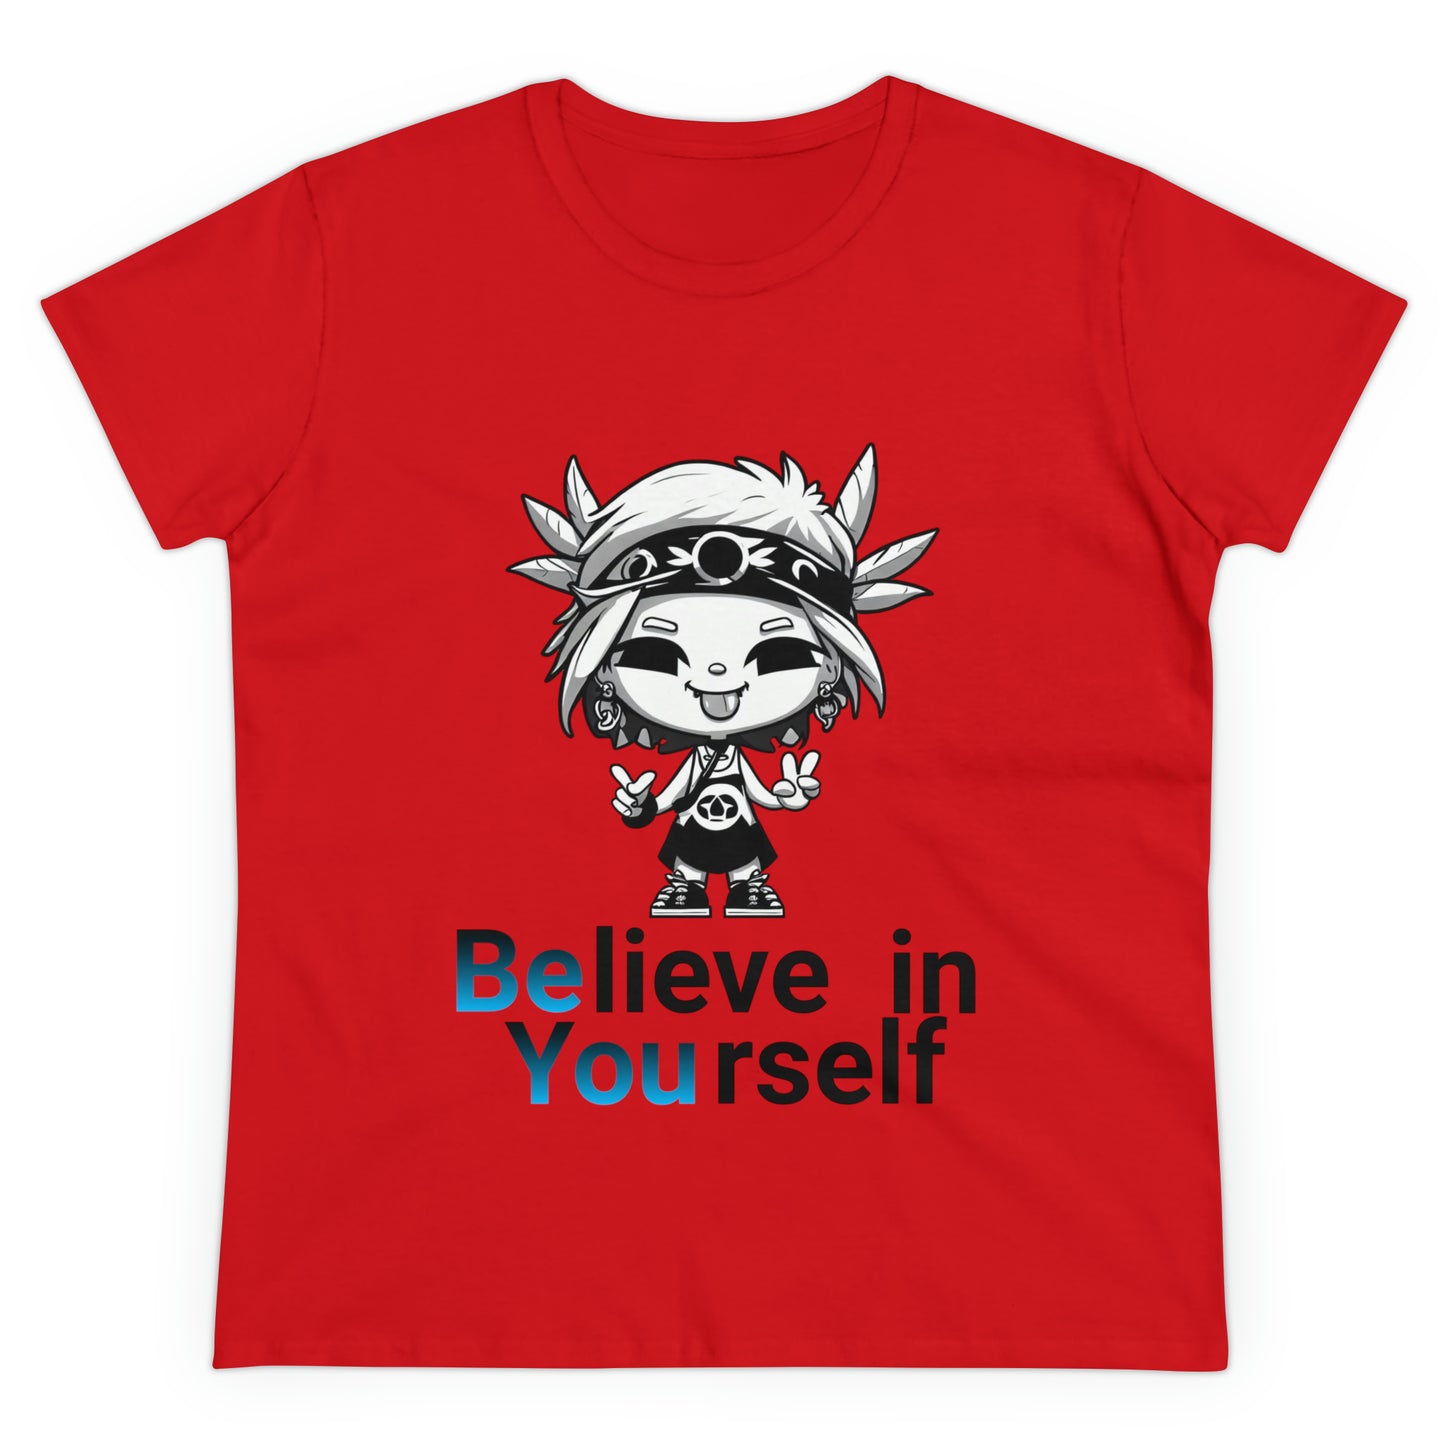 Women's Midweight Cotton Tee, Believe in Yourself chibi